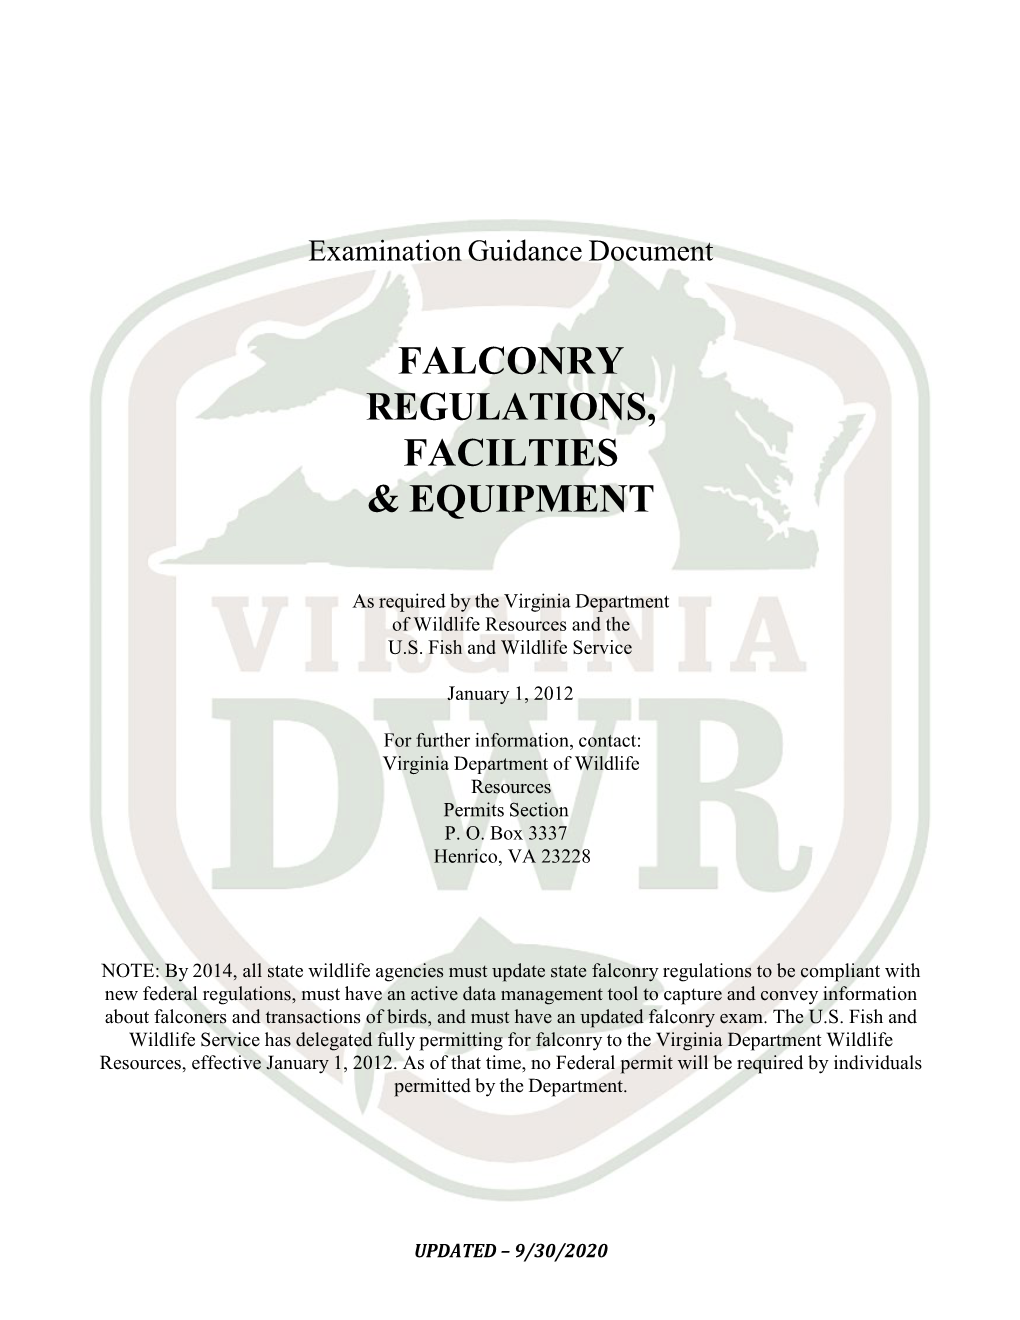 Falconry Regulations, Facilities, and Equipment